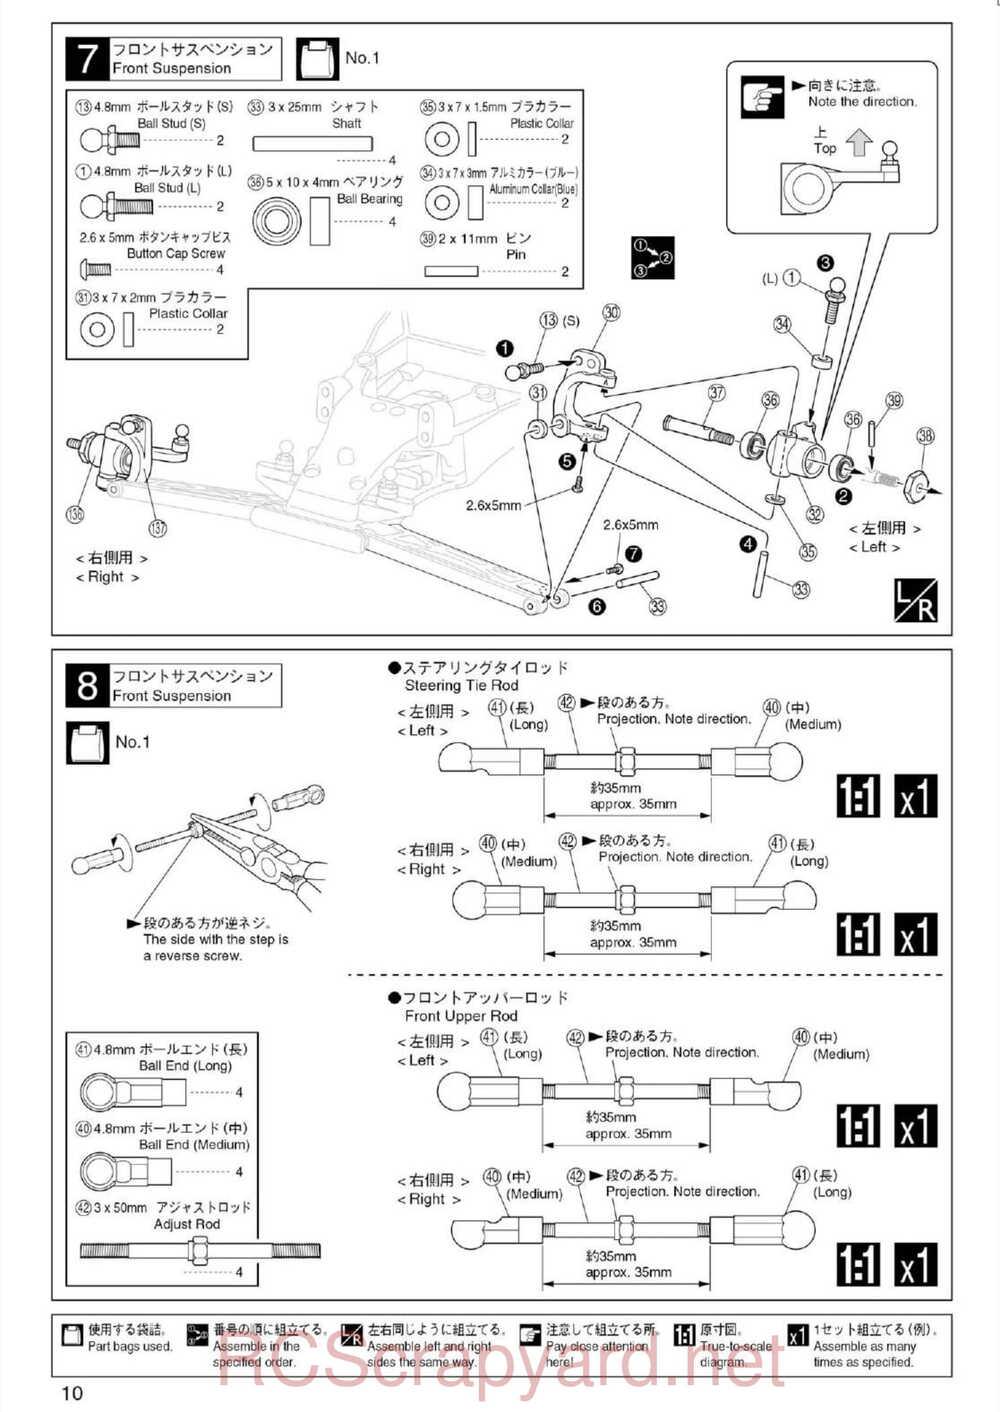 Kyosho - 30074 - Ultima-RB5 - Manual - Page 10